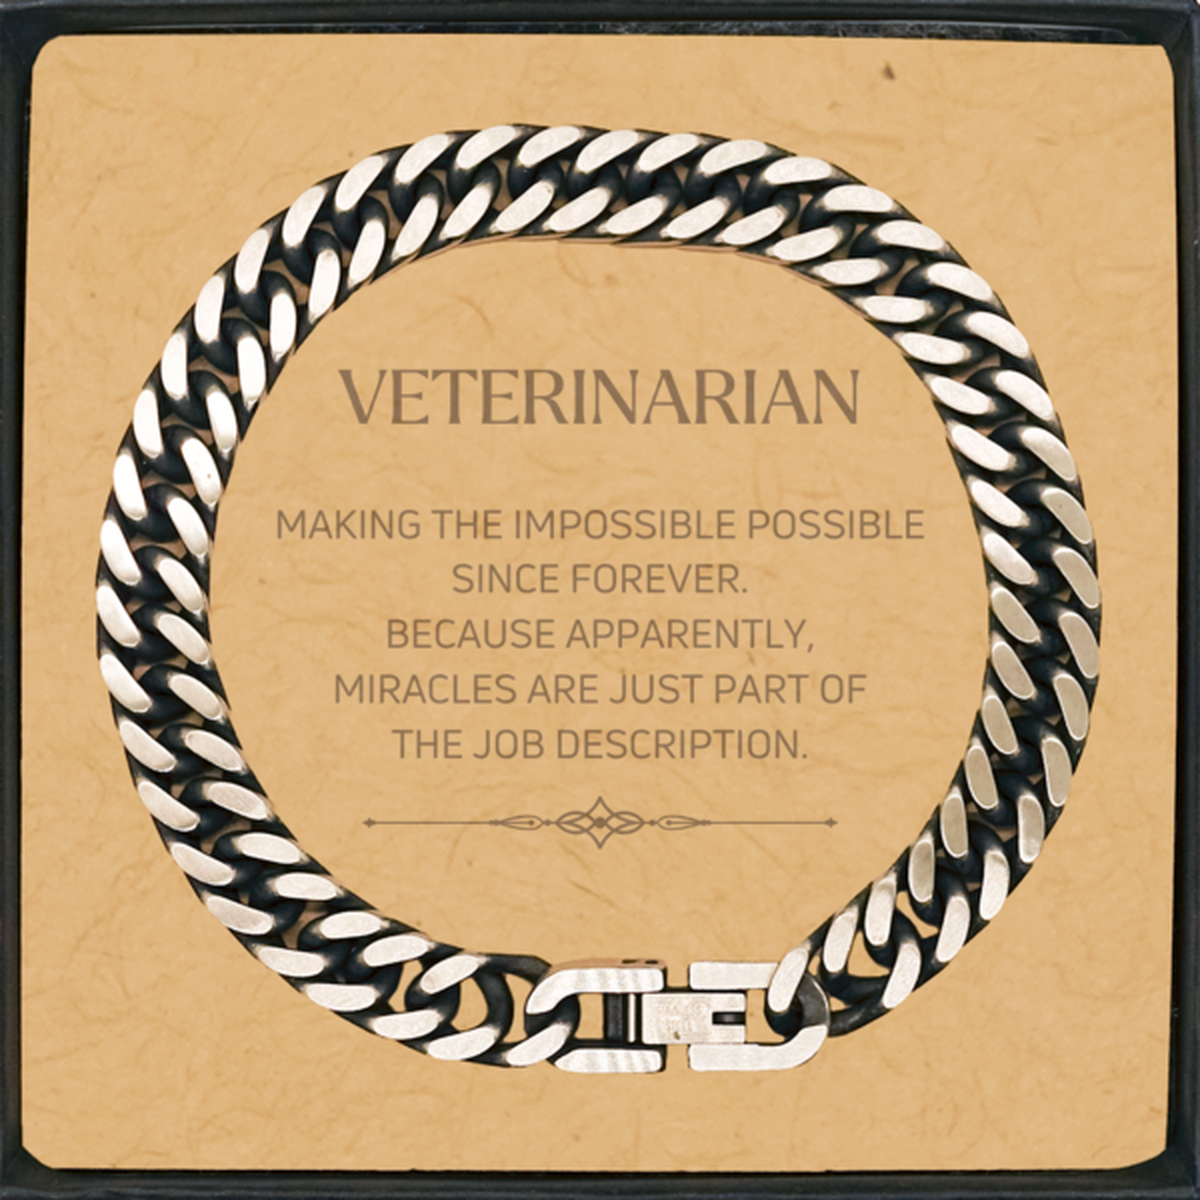 Funny Veterinarian Gifts, Miracles are just part of the job description, Inspirational Birthday Cuban Link Chain Bracelet For Veterinarian, Men, Women, Coworkers, Friends, Boss